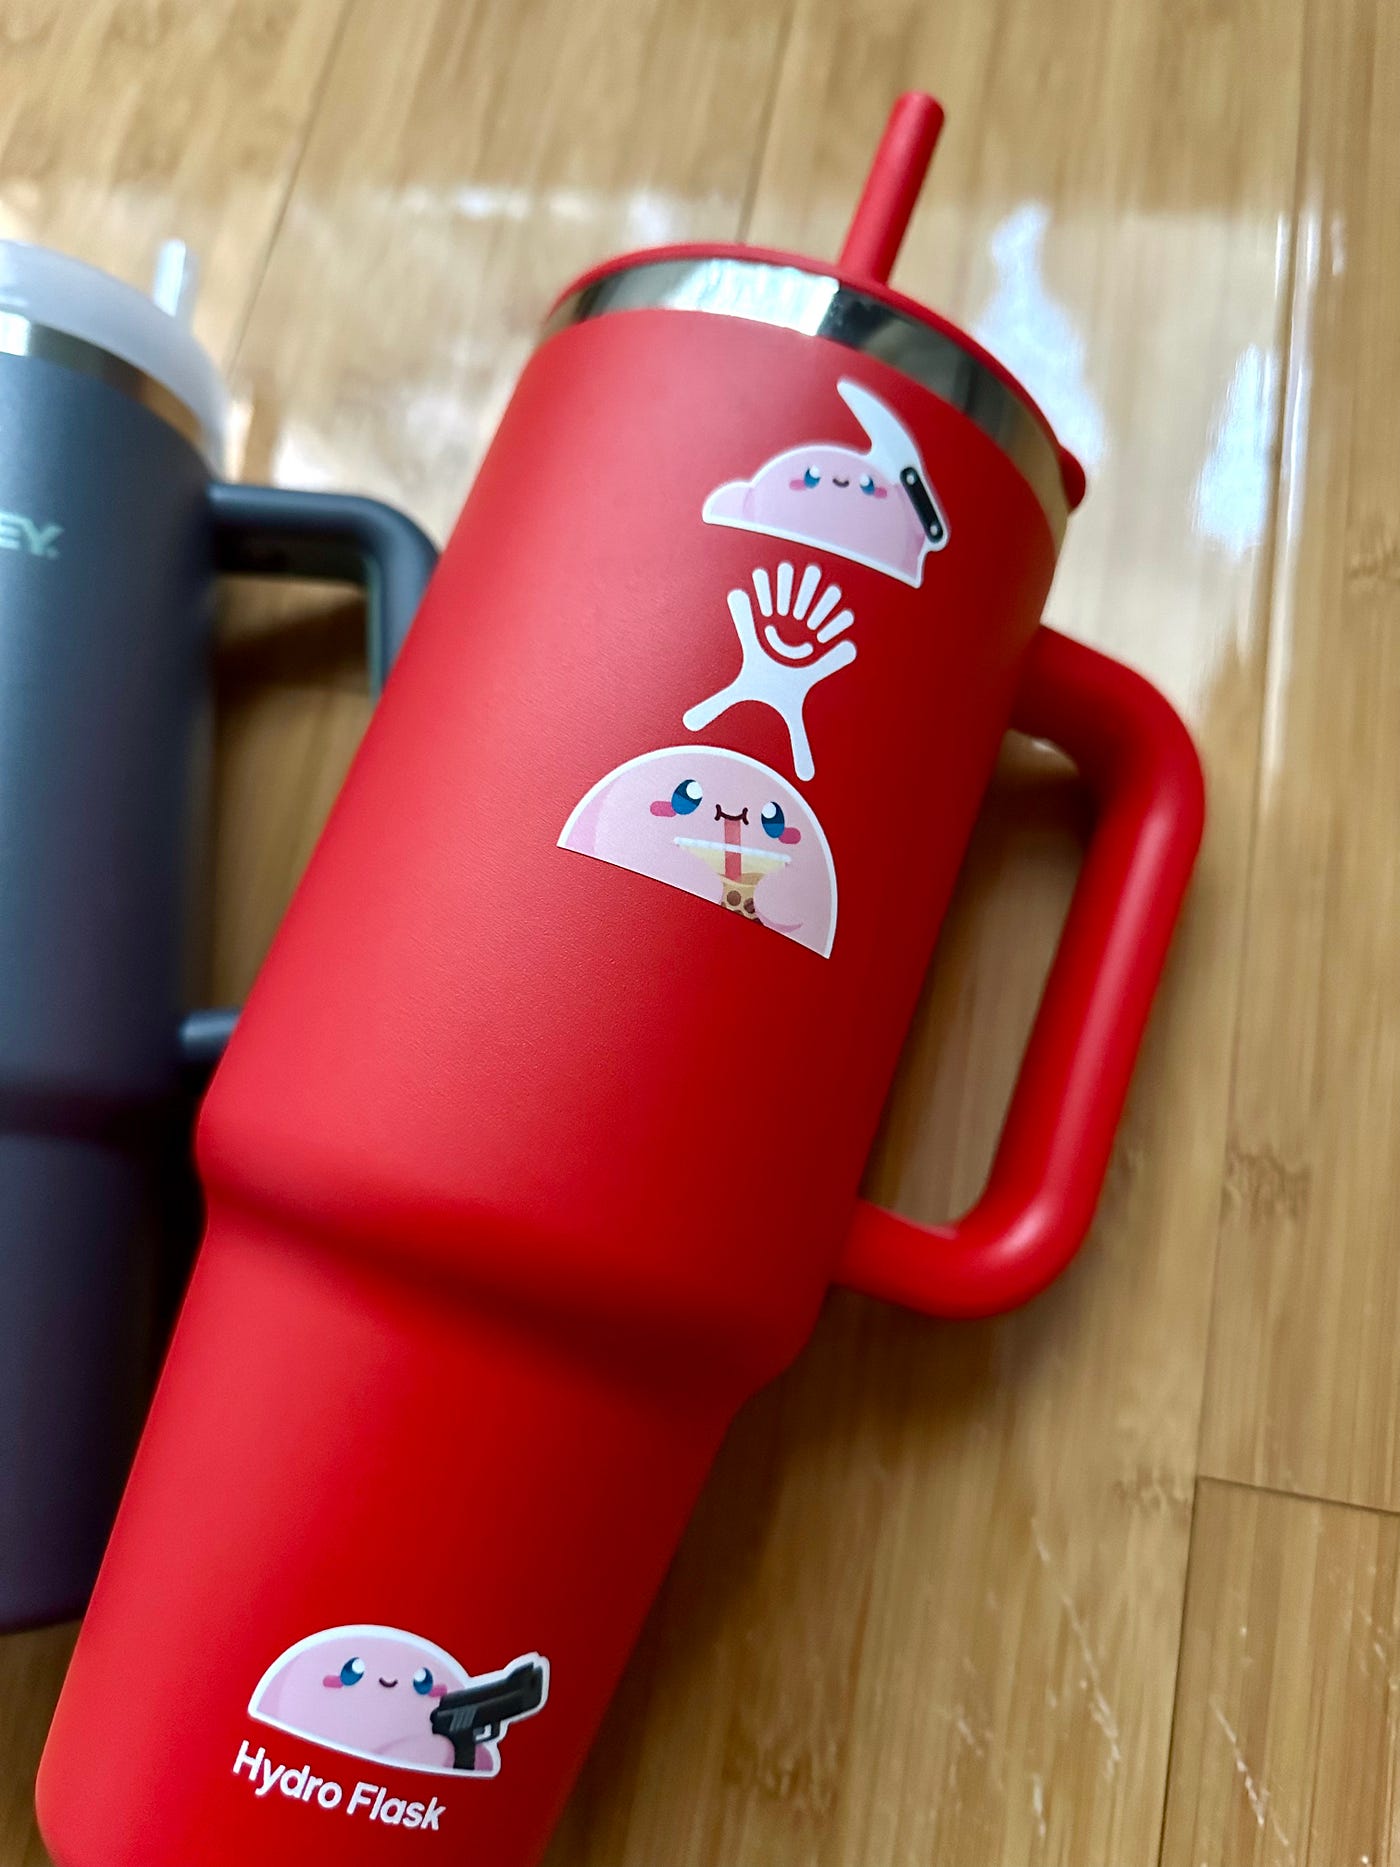 8 Reasons I Will Not Betray My Hydro Flask for a Stanley Cup – The